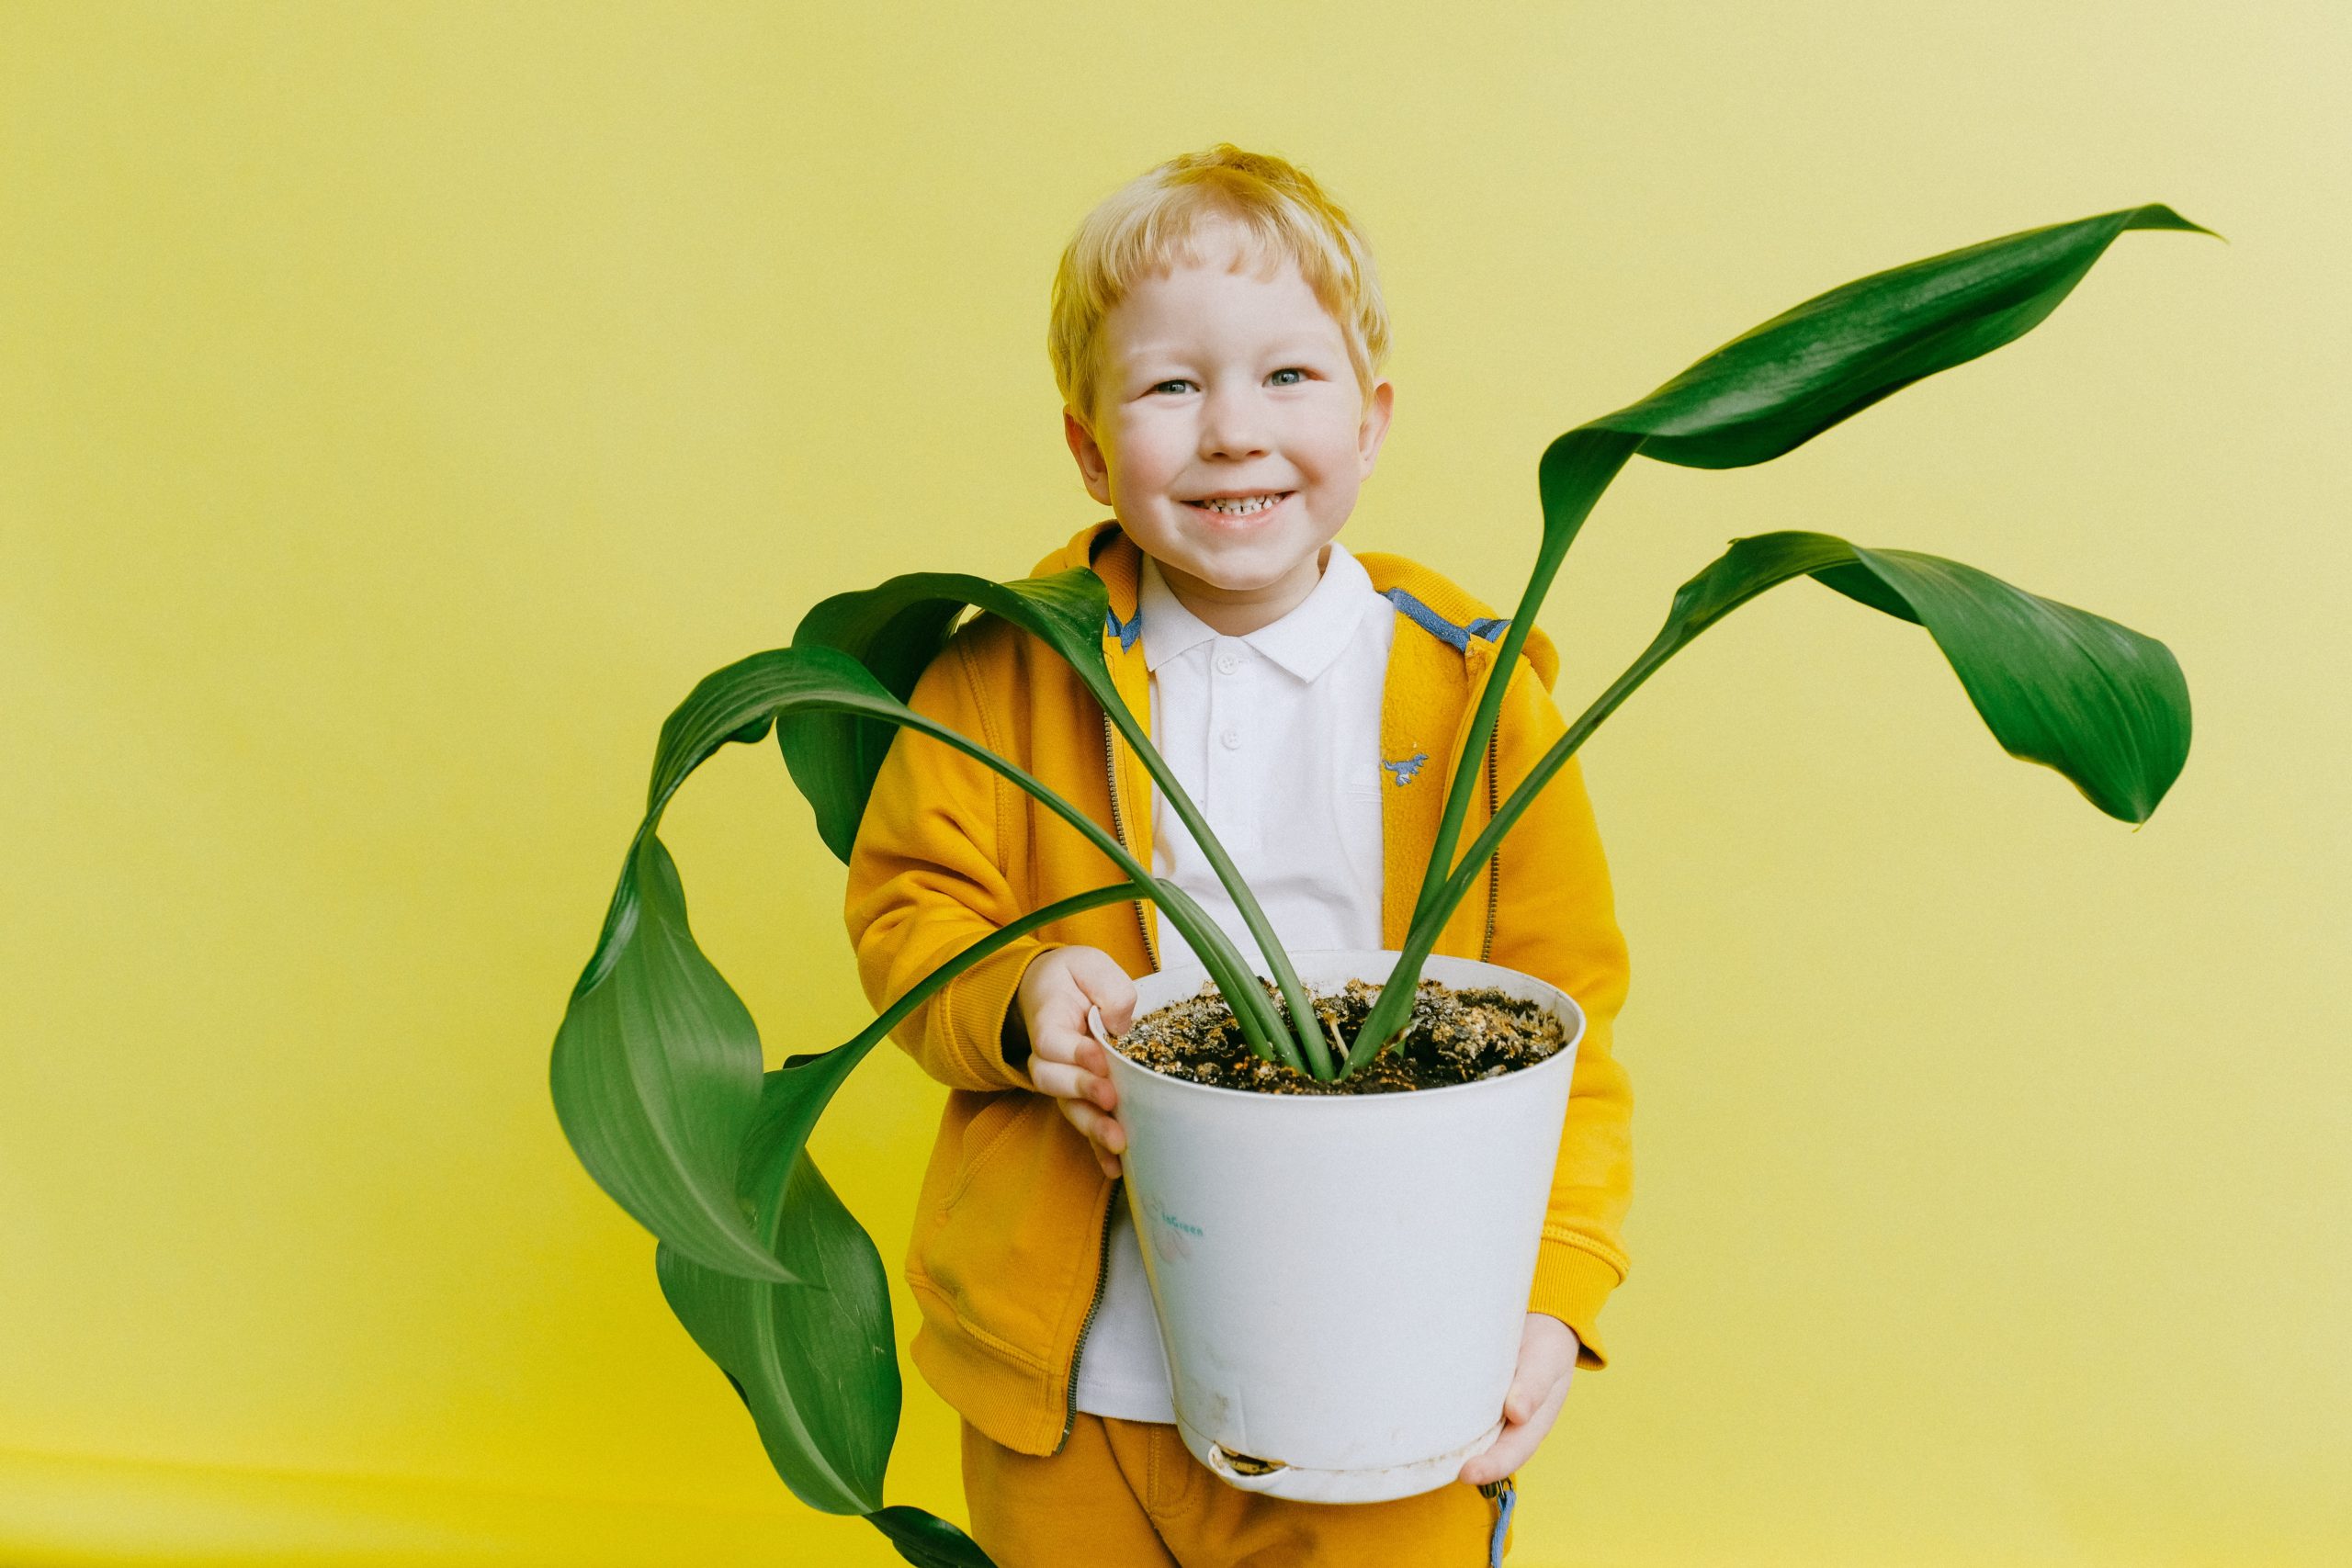 SMiling young boy holding a pot plant